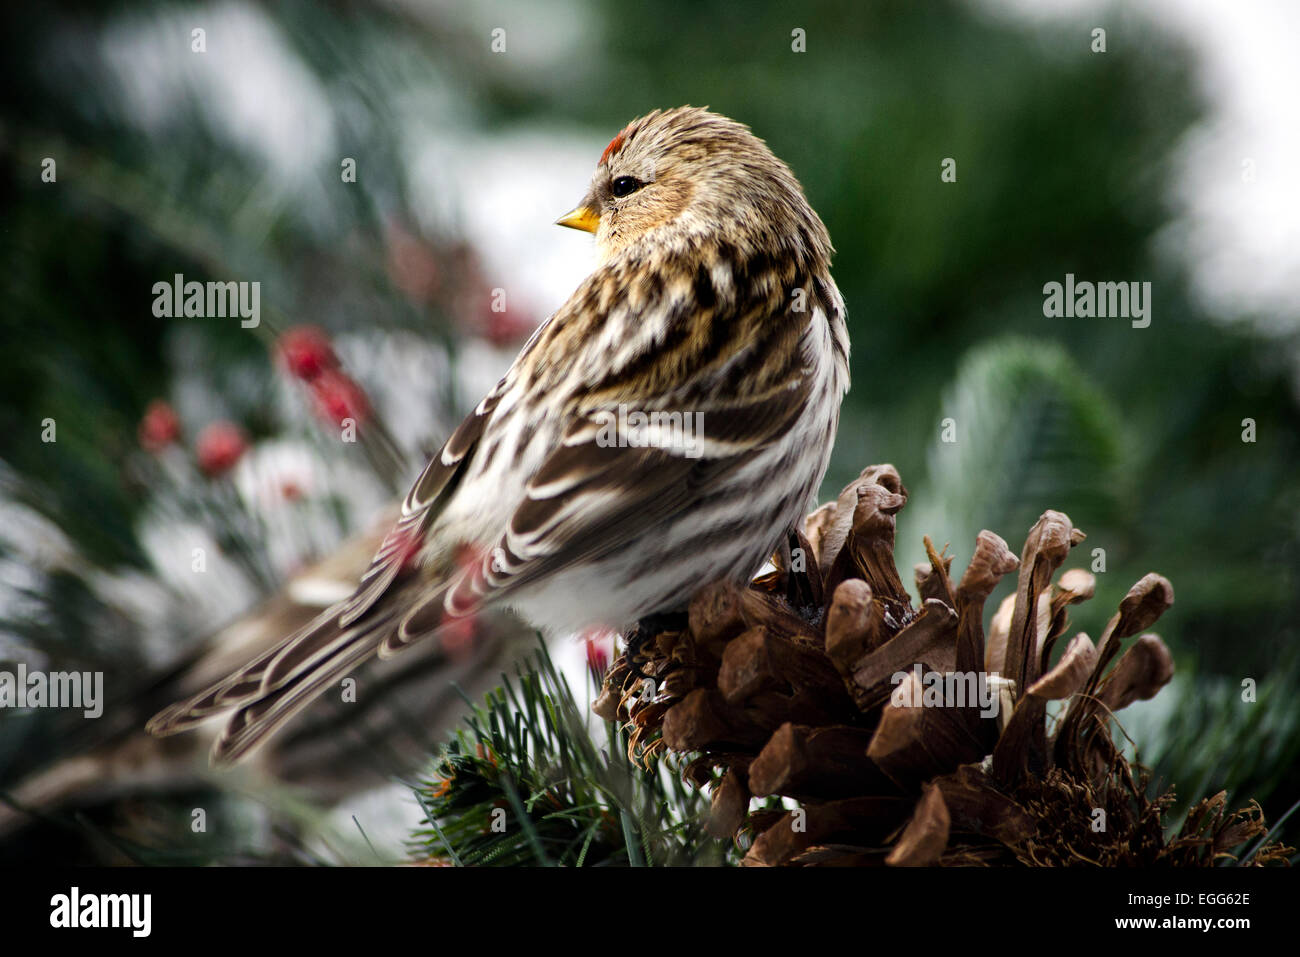 Common redpoll bird perched on a pine cone close up. Stock Photo